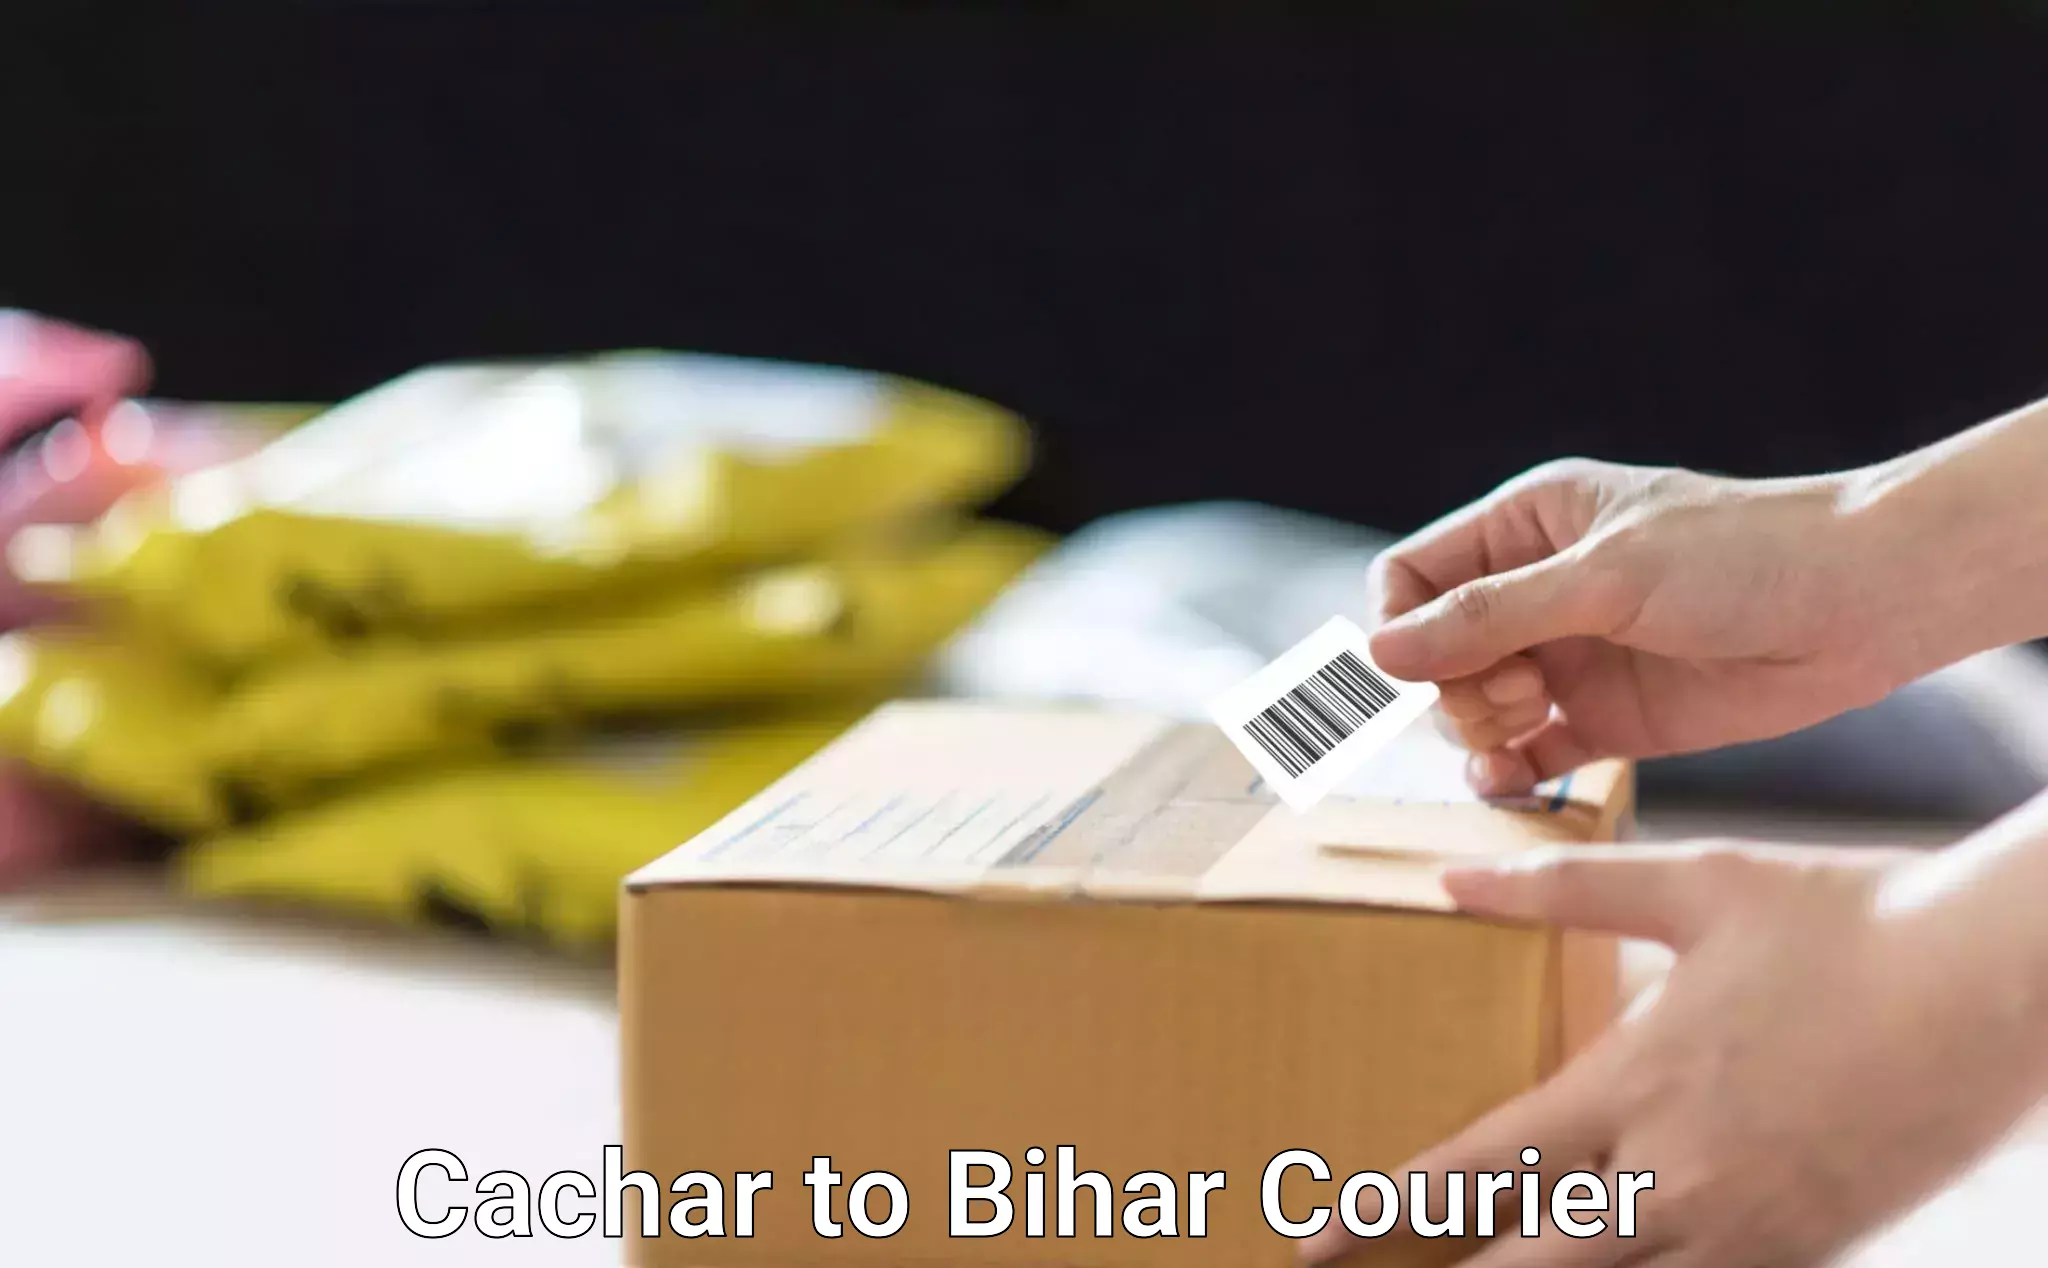 Affordable parcel service Cachar to Kochas